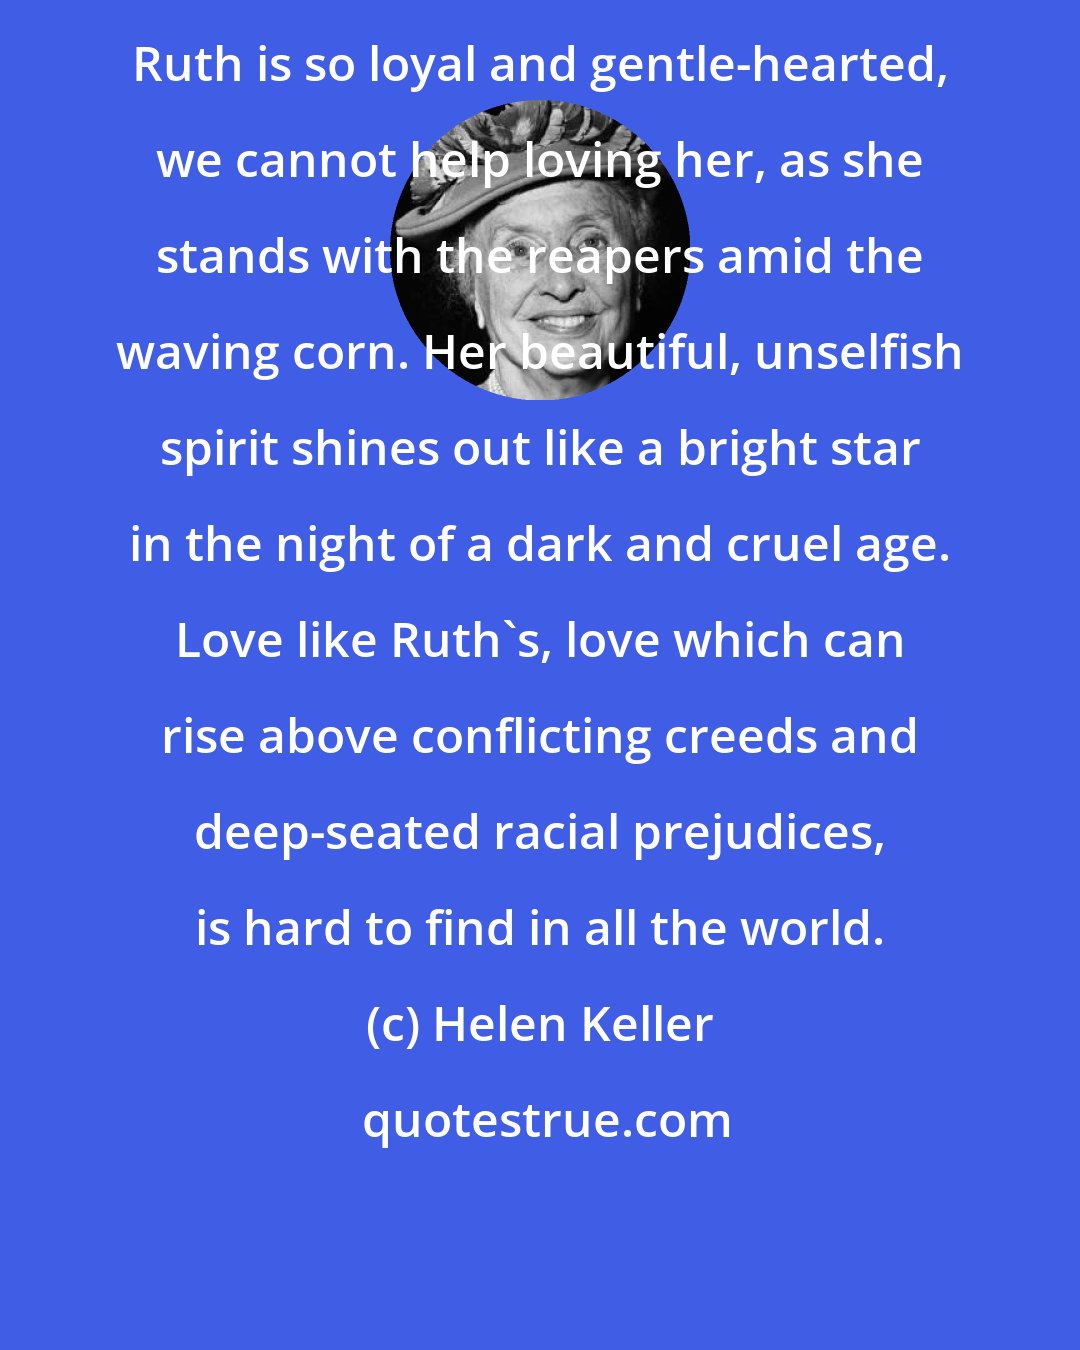 Helen Keller: Ruth is so loyal and gentle-hearted, we cannot help loving her, as she stands with the reapers amid the waving corn. Her beautiful, unselfish spirit shines out like a bright star in the night of a dark and cruel age. Love like Ruth's, love which can rise above conflicting creeds and deep-seated racial prejudices, is hard to find in all the world.